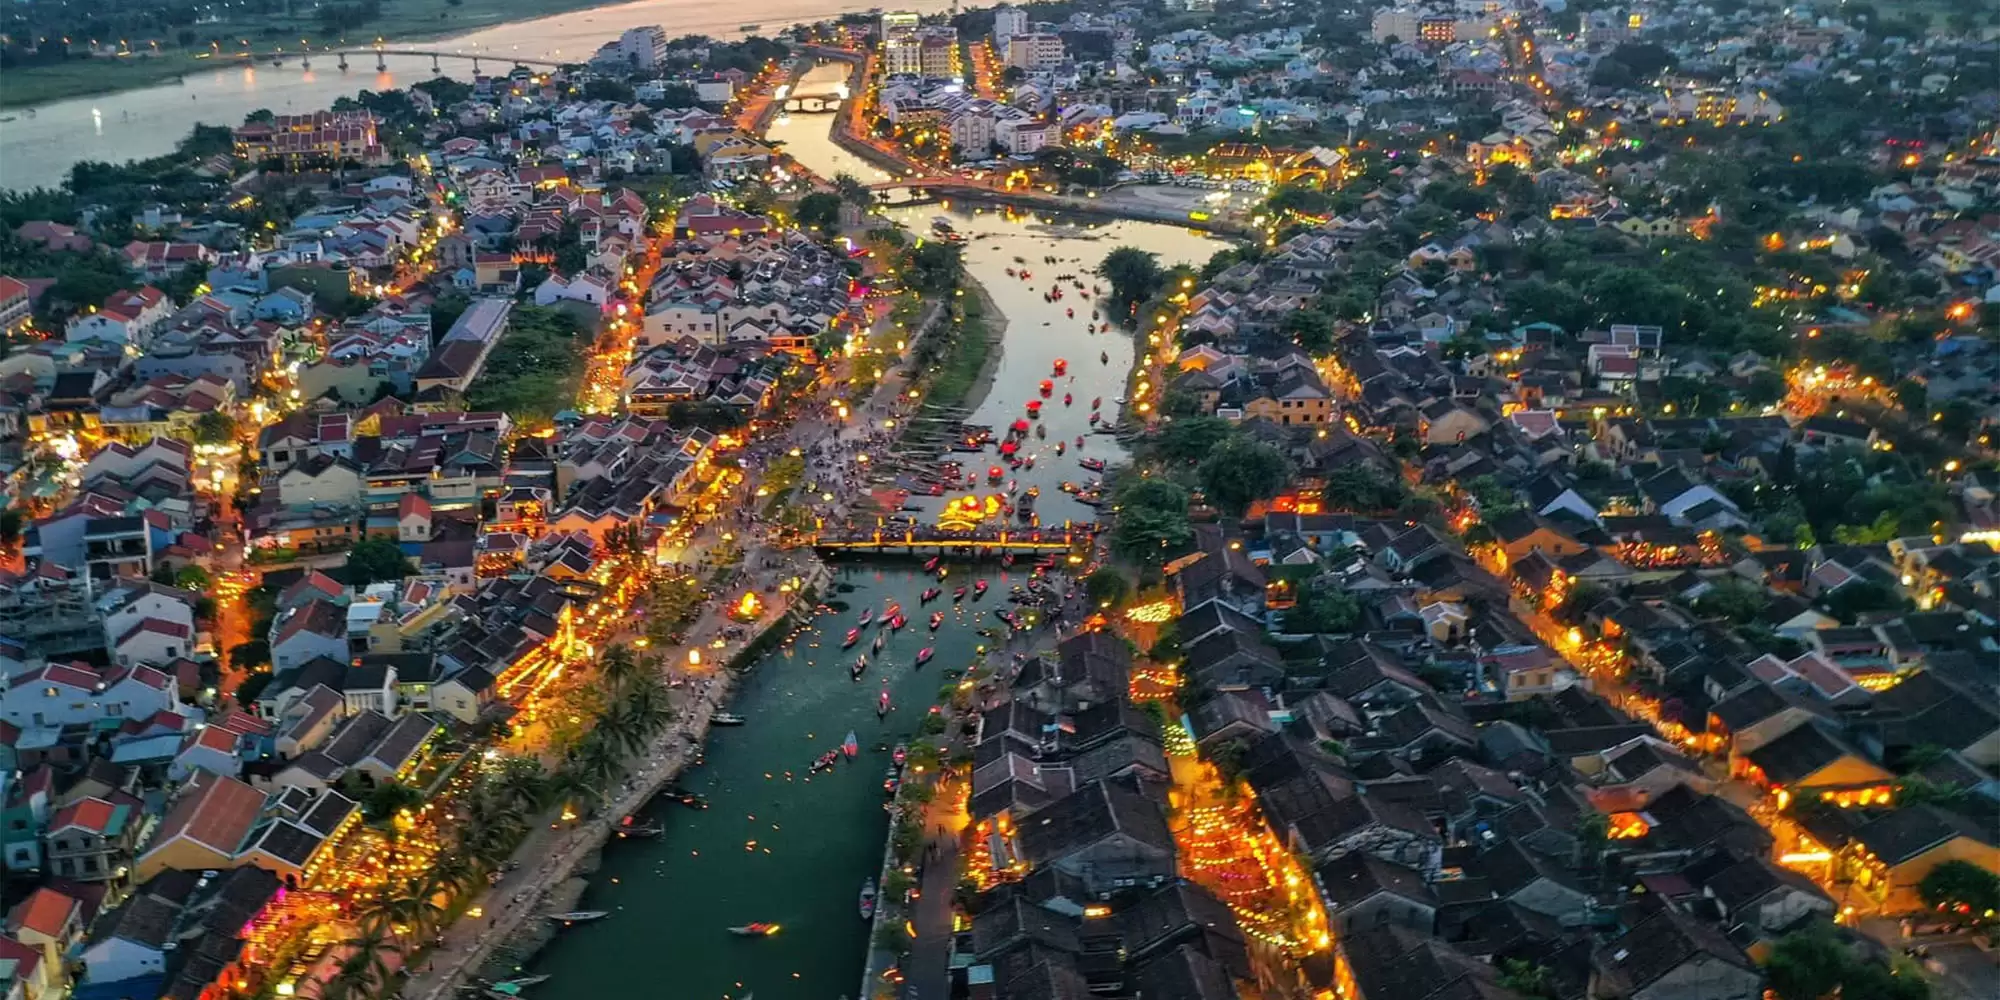 Hoi An is honored as the Best Corporate Resort Destination in Asia 2023.